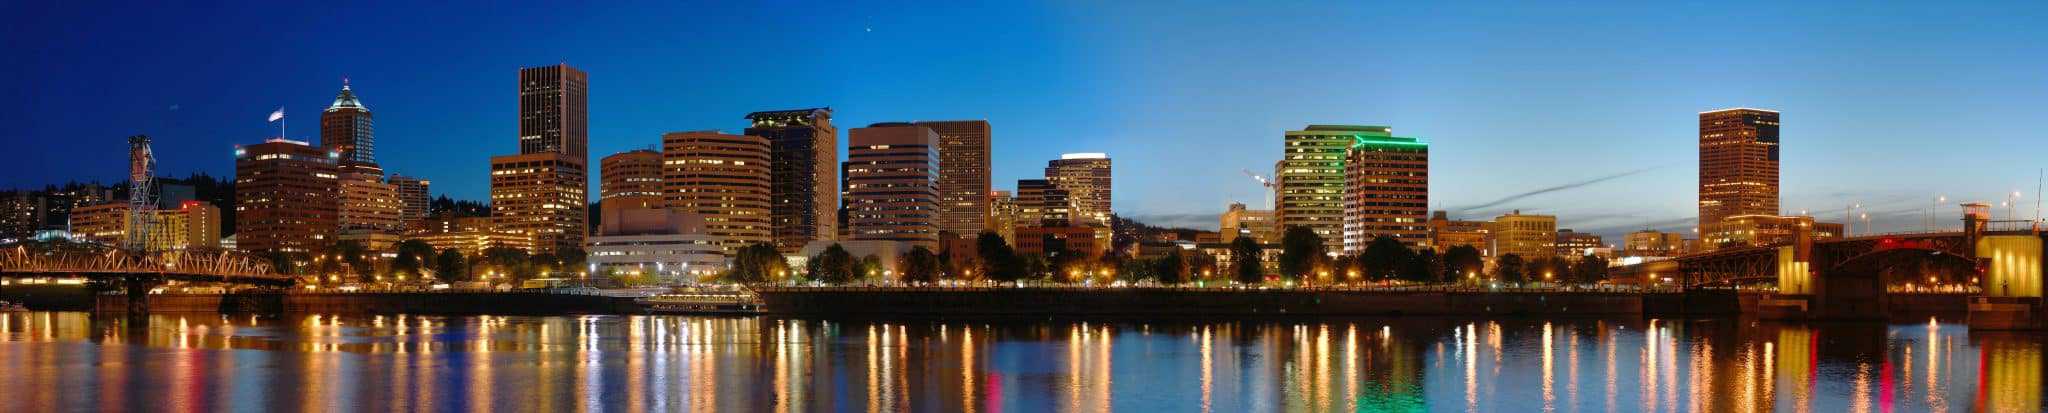 Panorama of downtown Portland at night. View from SE Portland across the Willamette River.